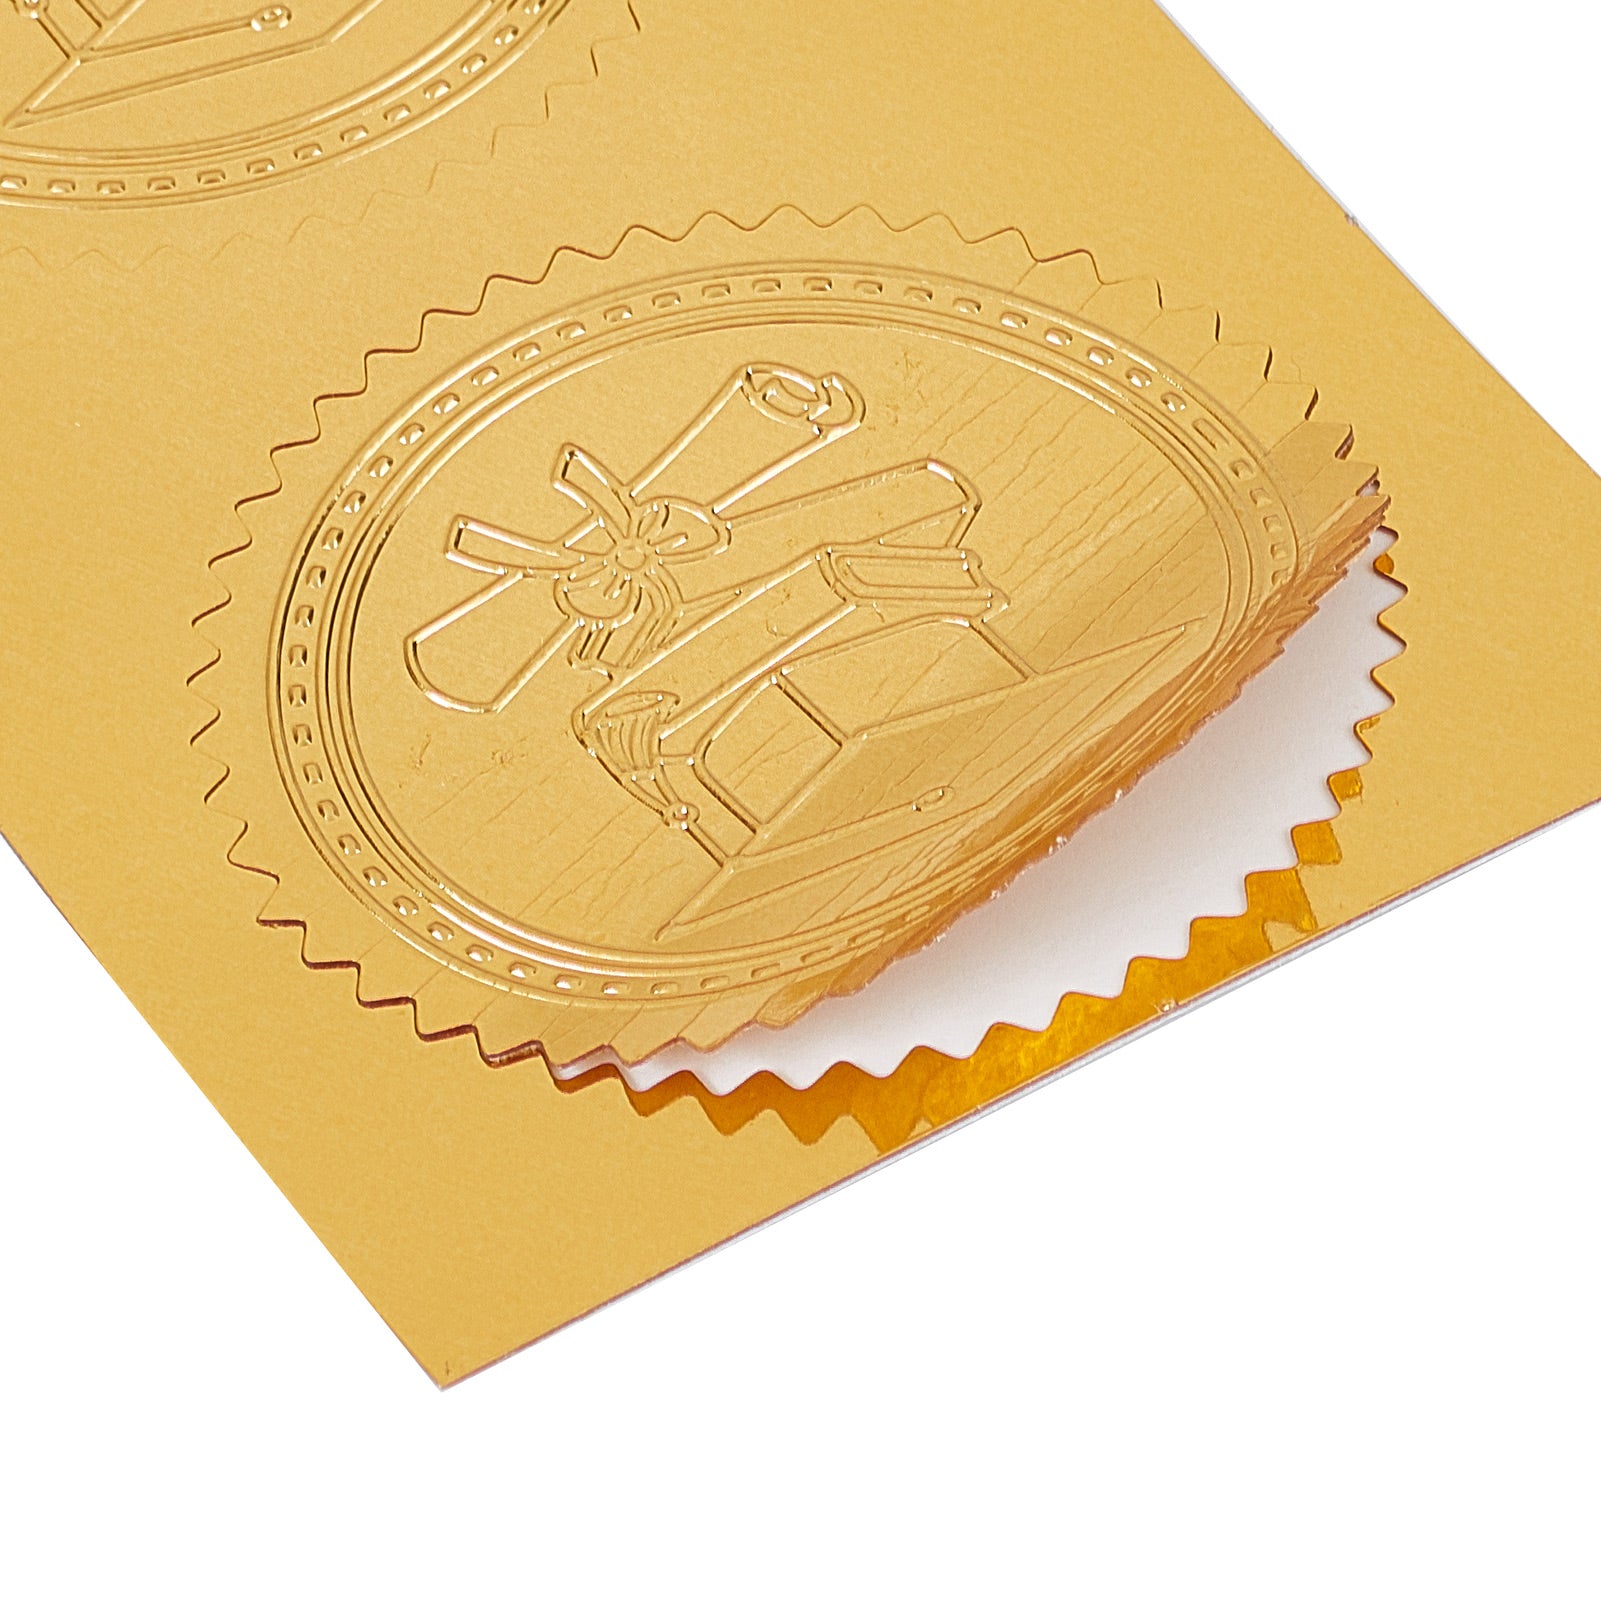 CRASPIRE 2 Inch Envelope Seals Stickers Winning Team 100pcs Embossed Foil  Seals Adhesive Gold Foil Seals Stickers